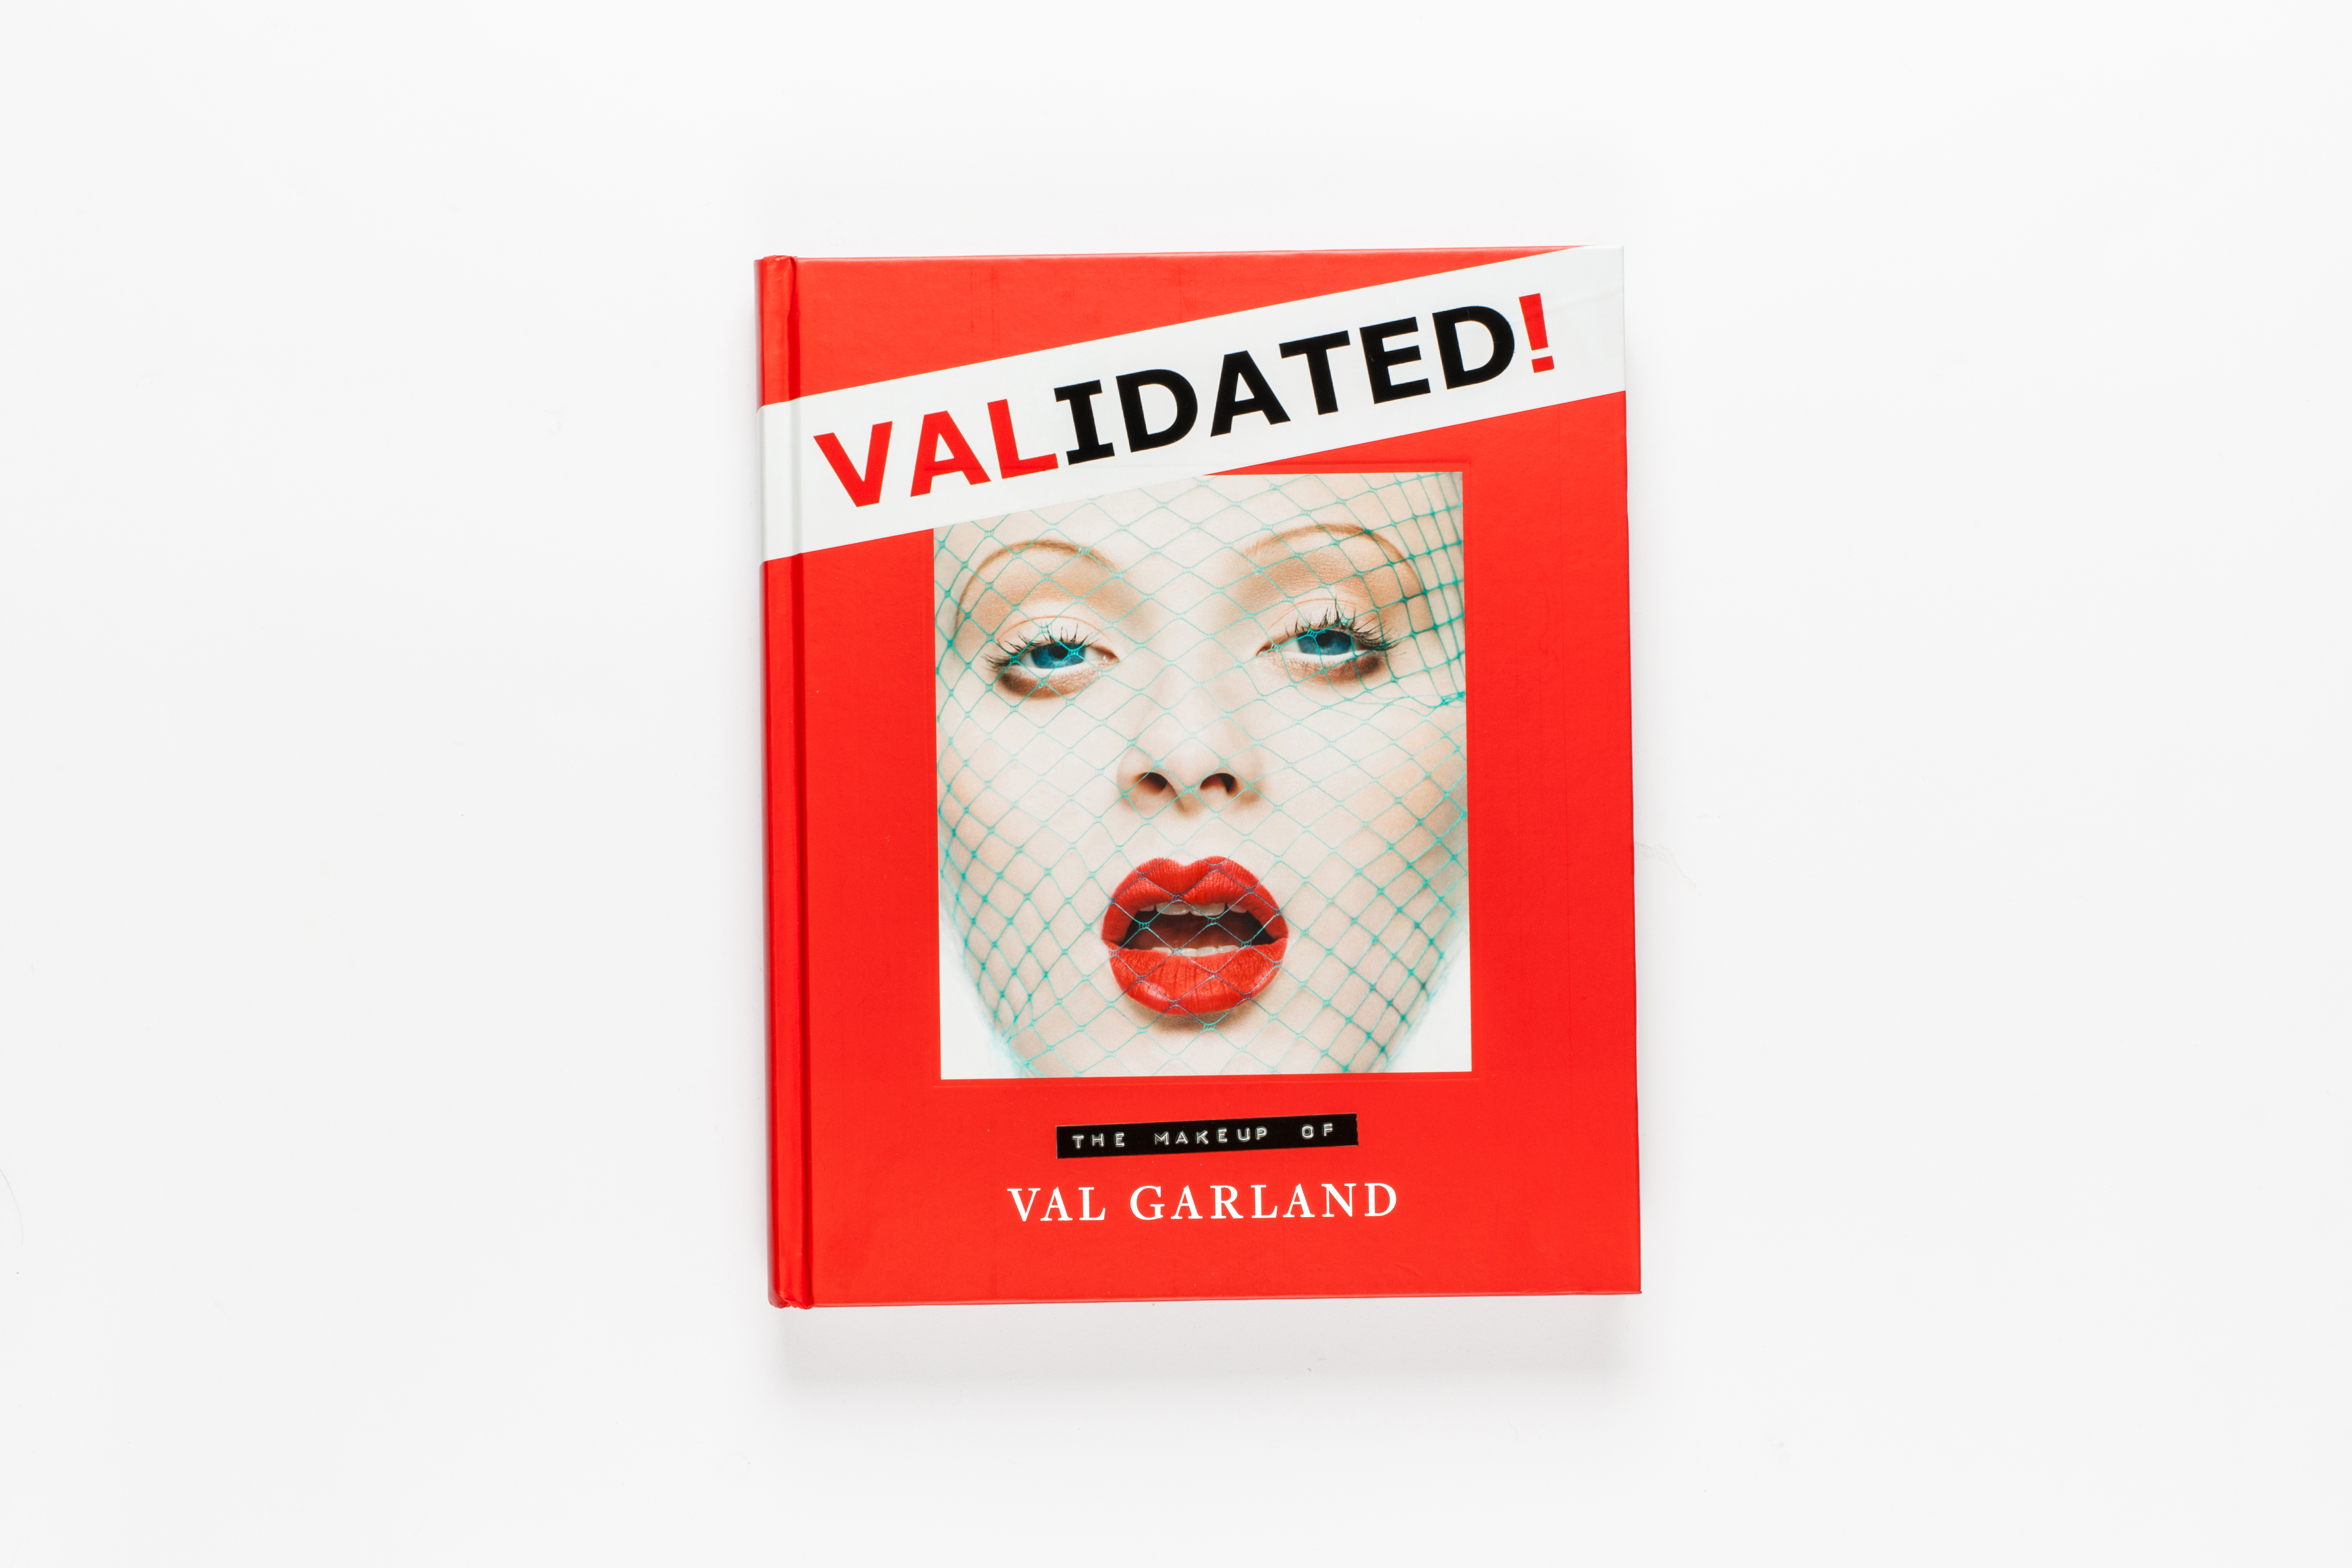 From Validated: the Makeup of Val Garland. Courtesy of Laurence King Publishing.